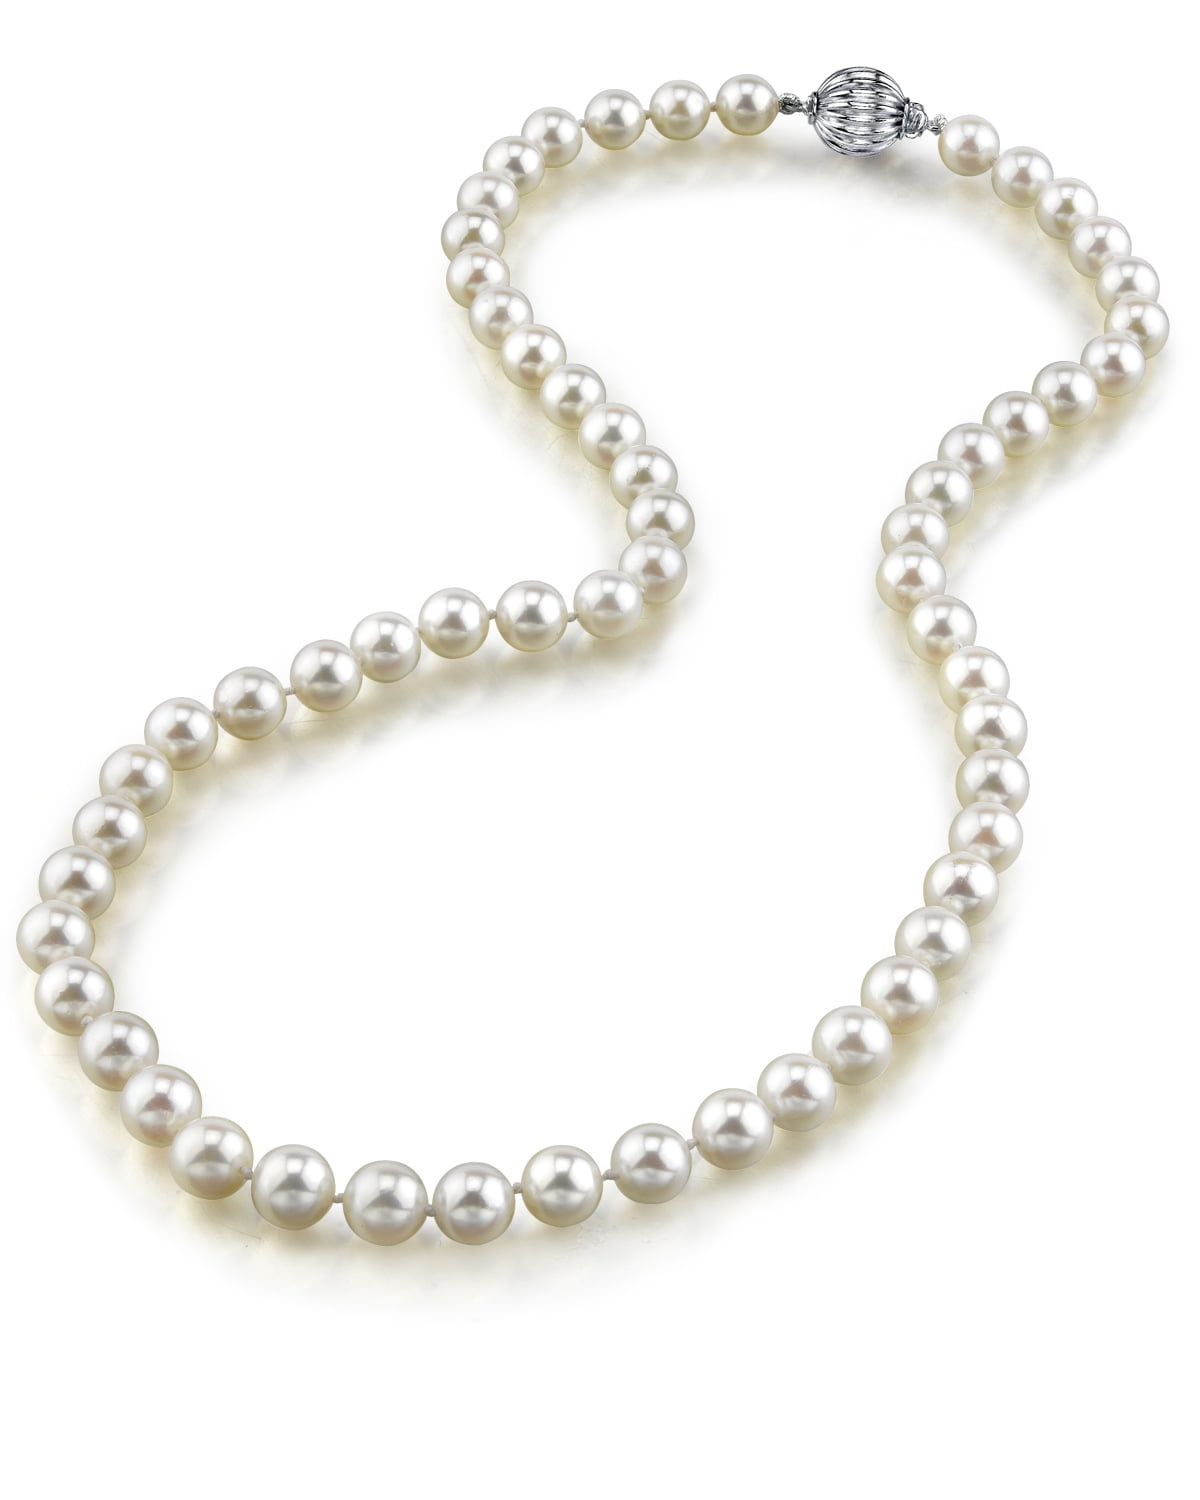 Triple Strand White Freshwater Cultured Pearl Necklace for Women AA PremiumPearl Quality Sterling Silver 18 